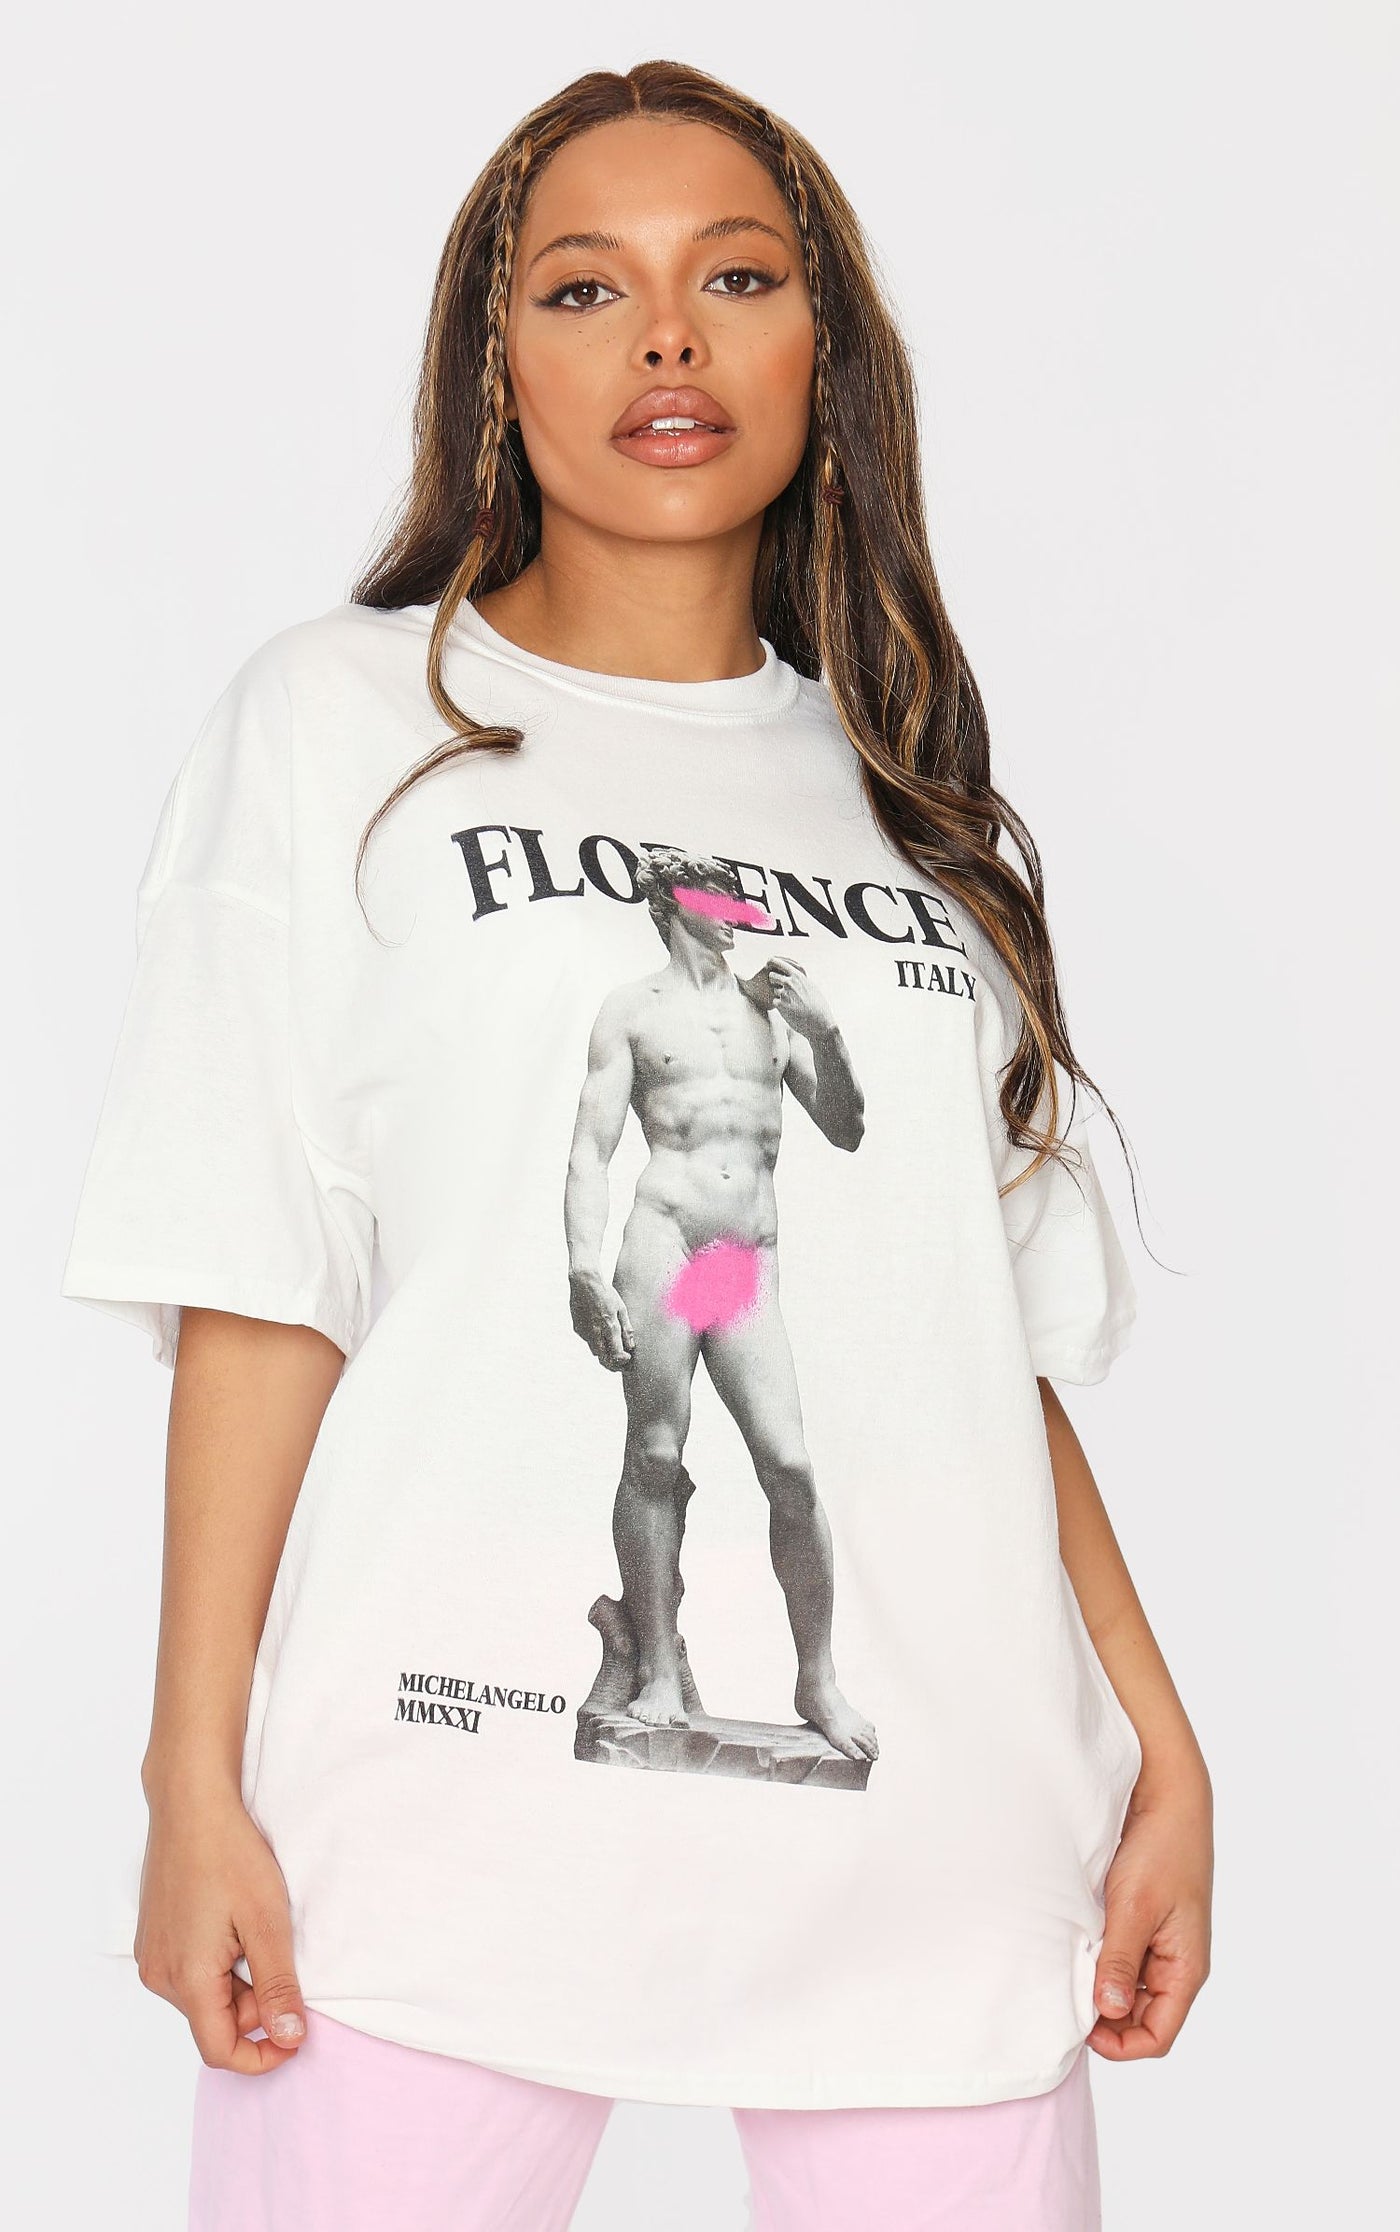 Michelangelo Statue Florence Italy White T-Shirt